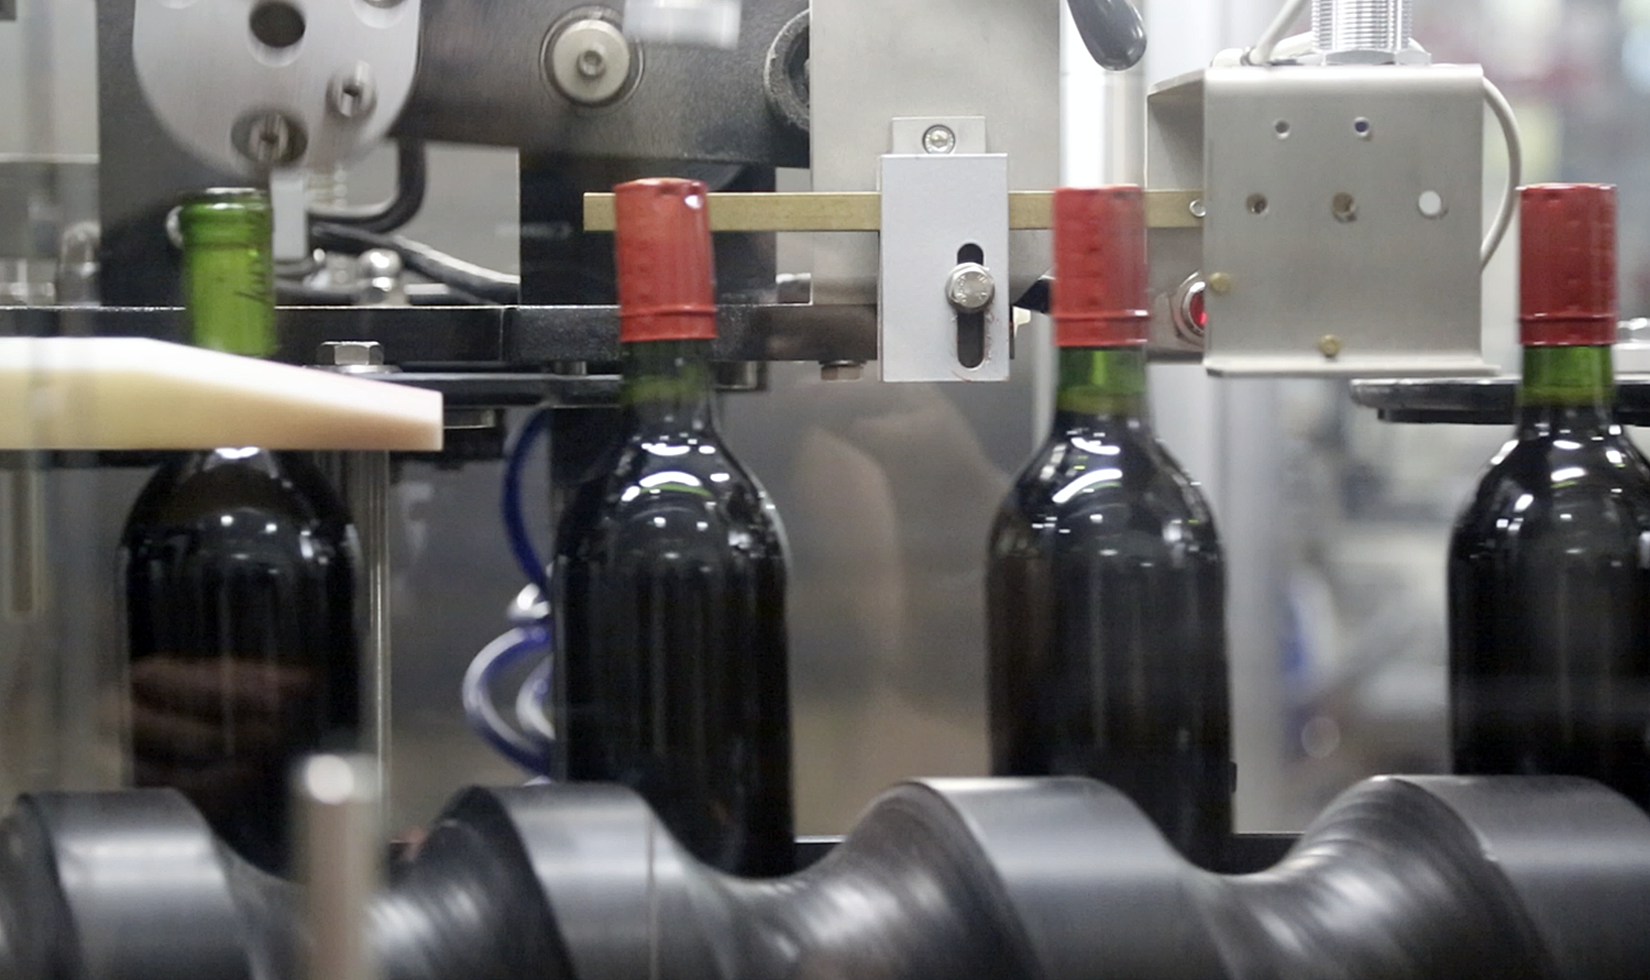 4 bottles of red wine in a capsulator being corked and sealed.